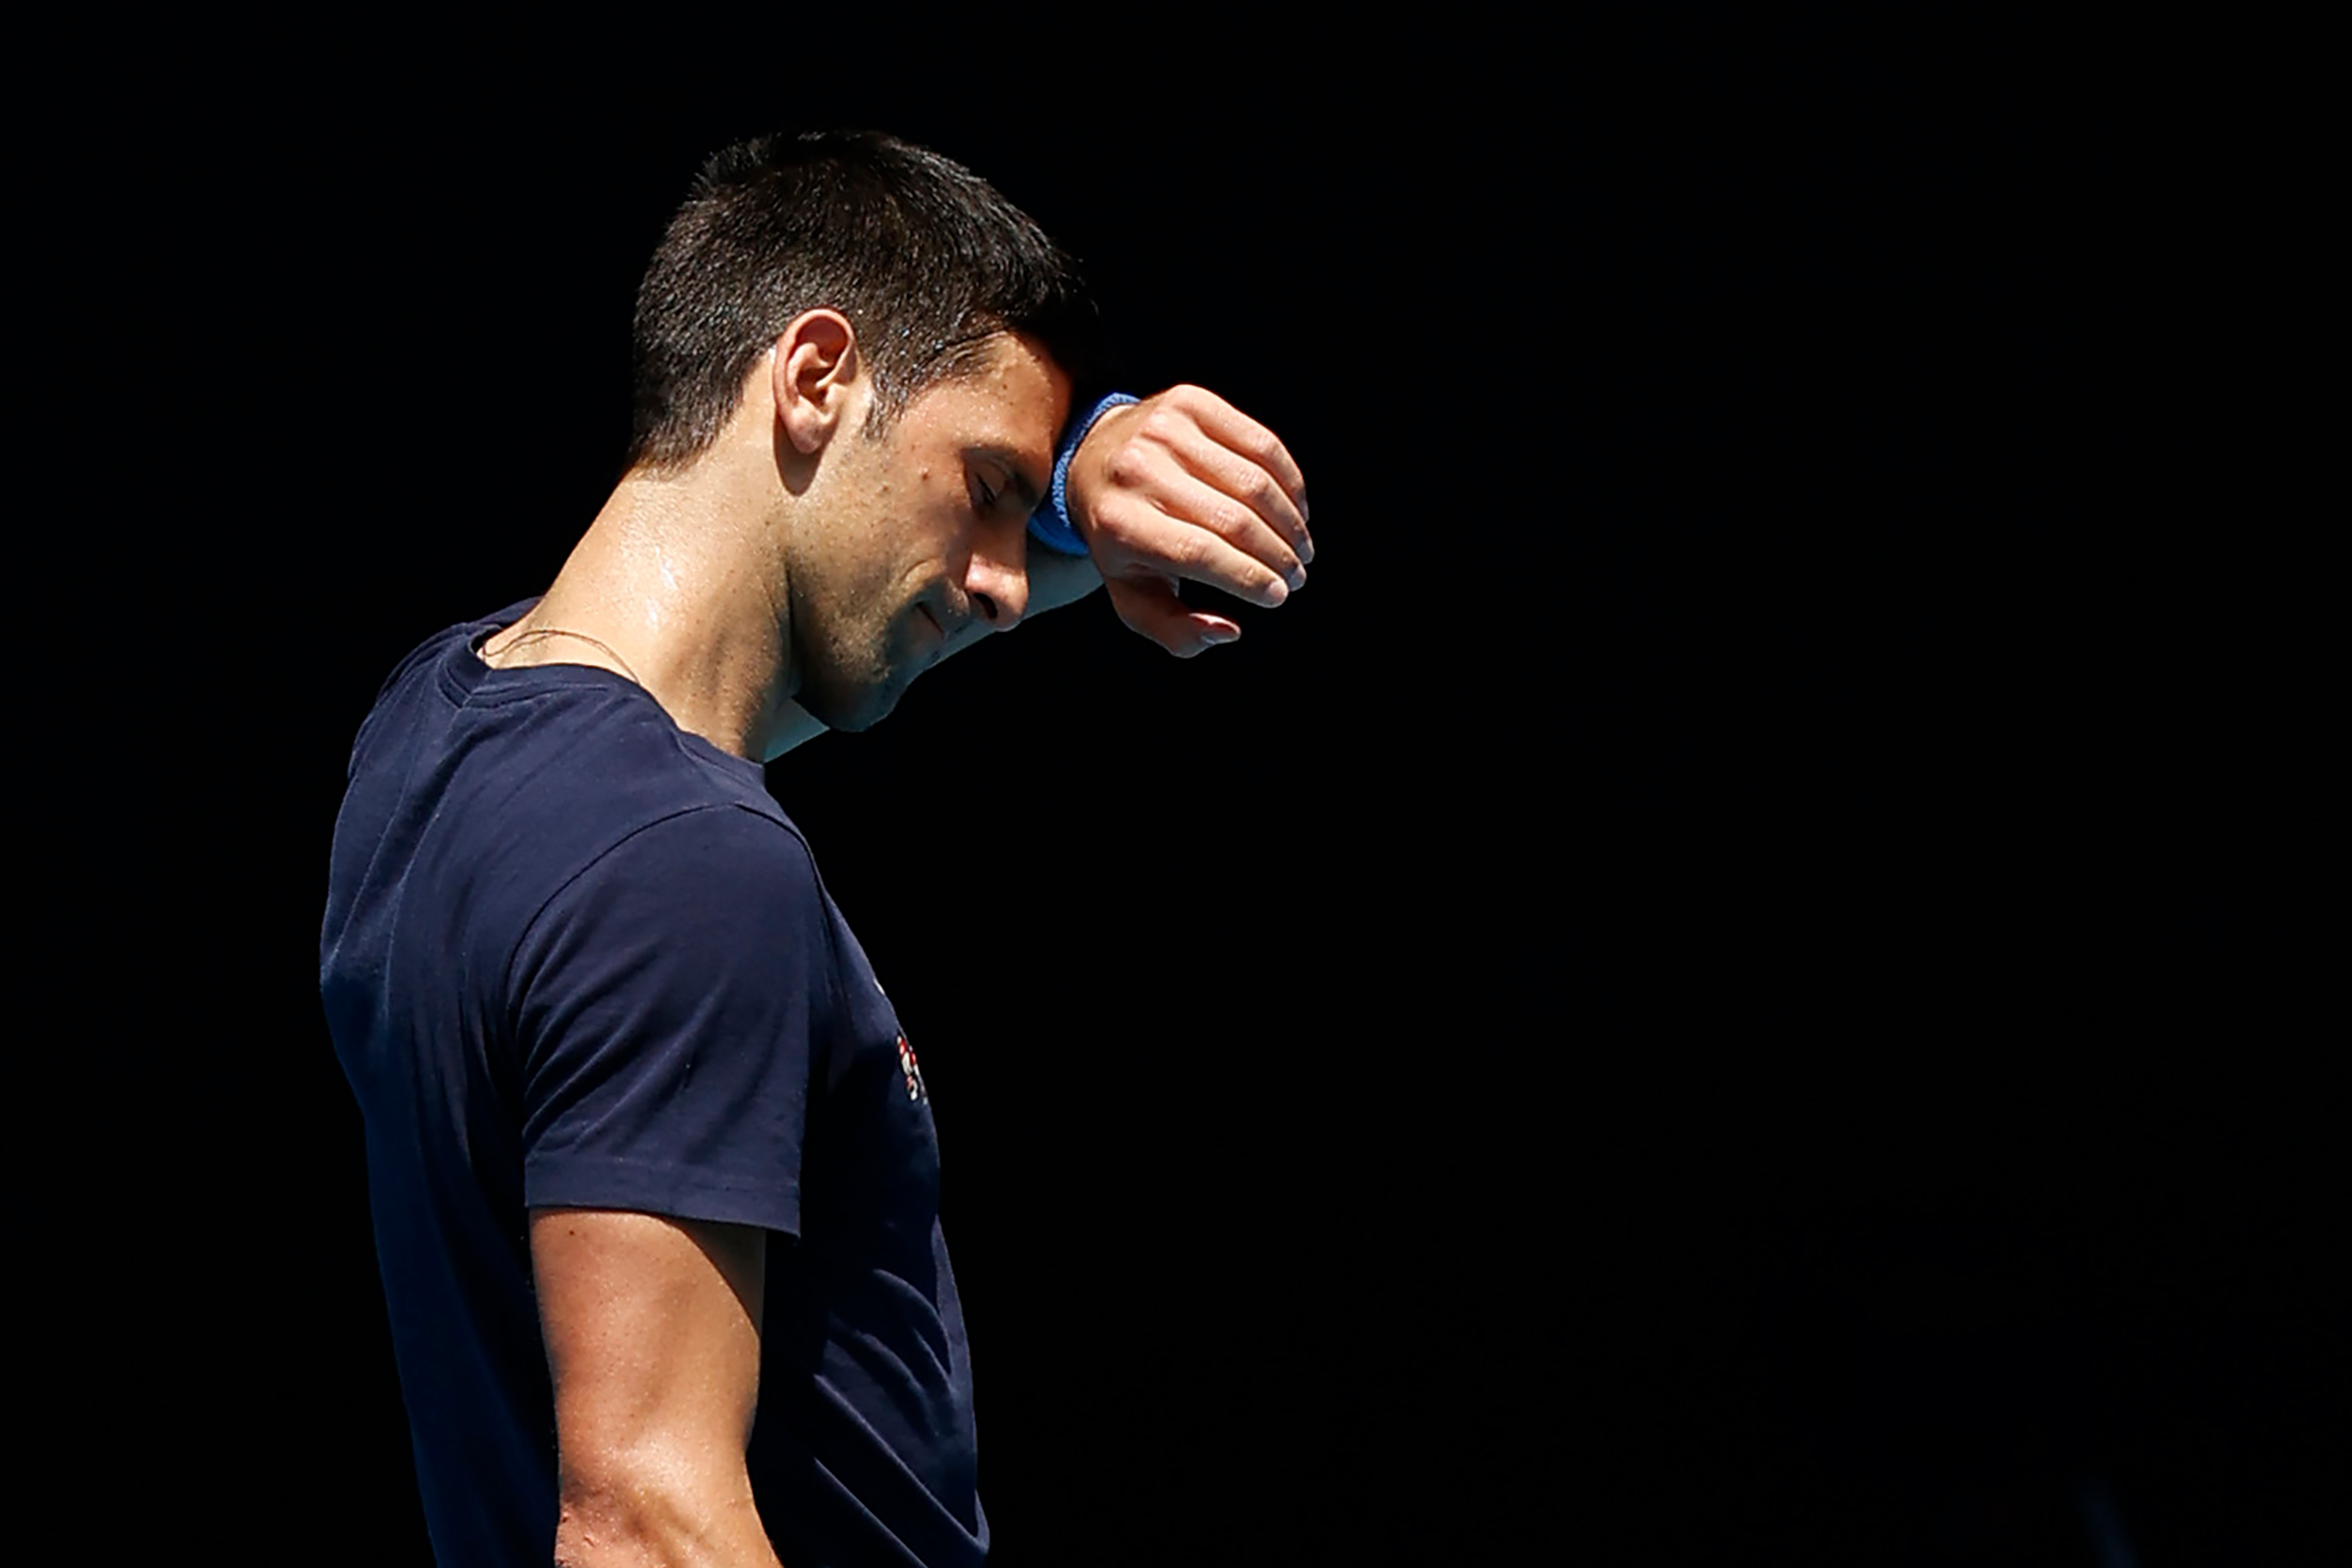 What's next for Djokovic after the new cancellation of his visa in Australia